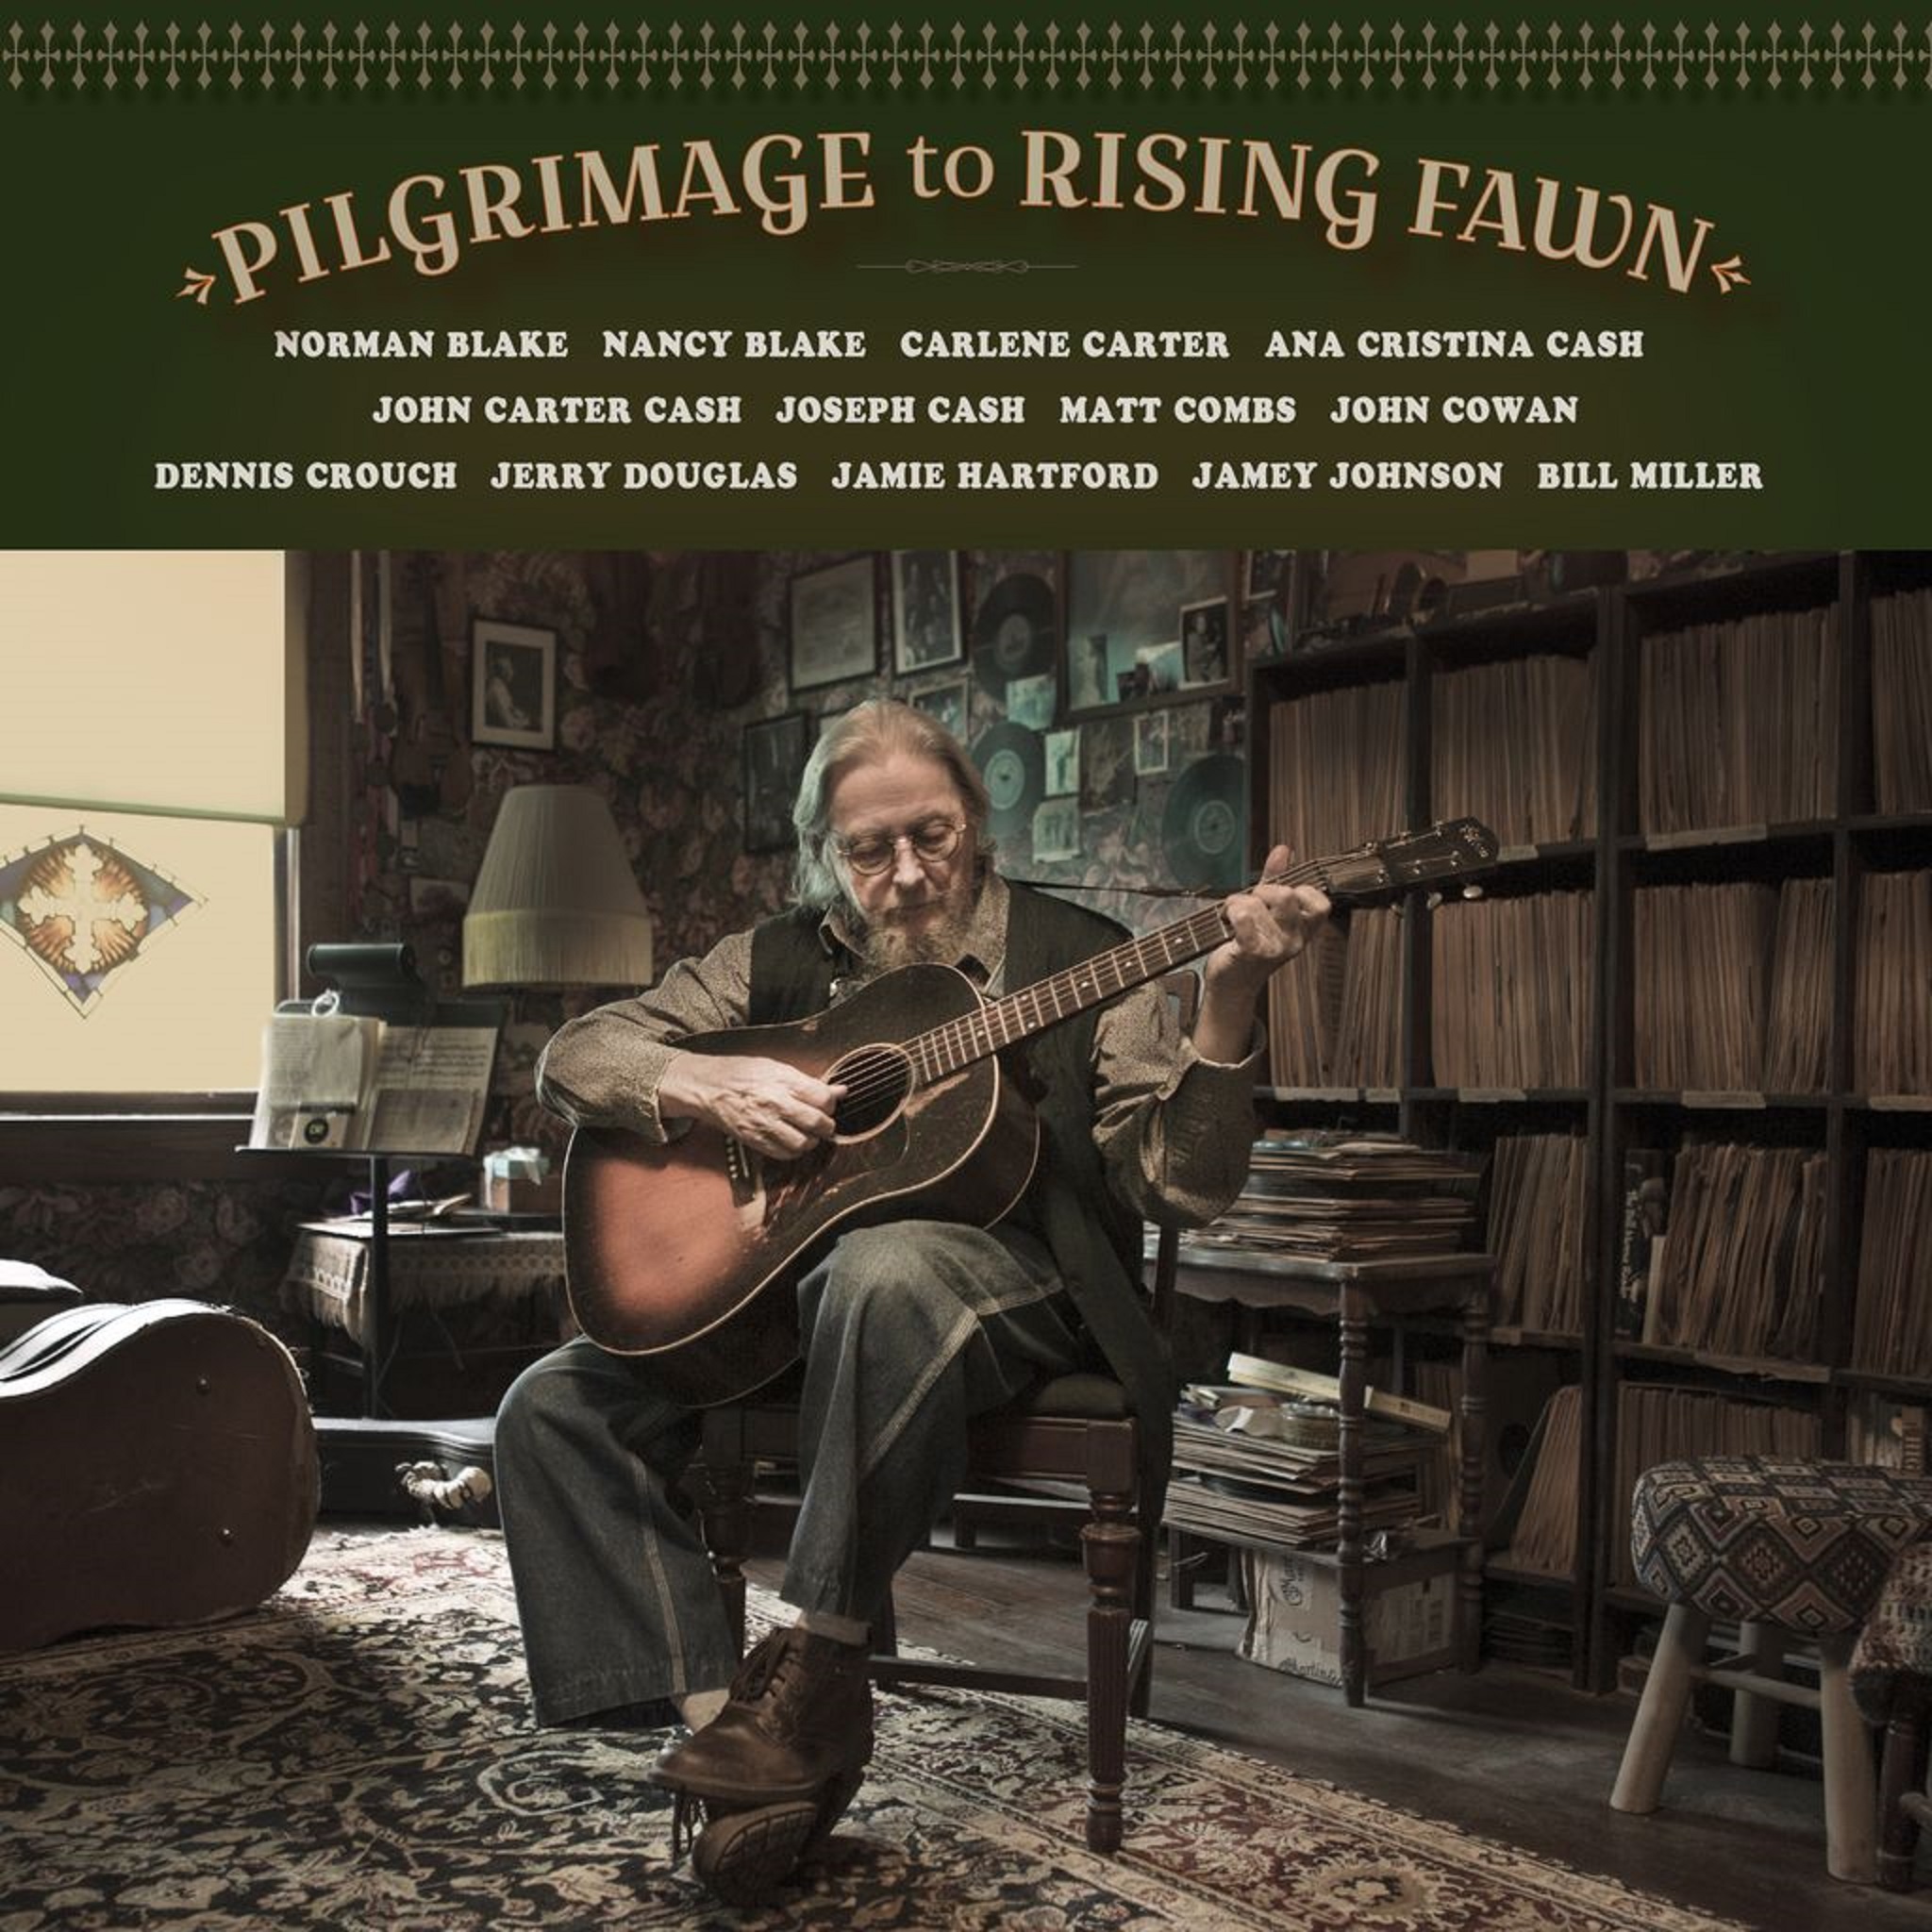 John Carter Cash Releases Pilgrimage to Rising Fawn Featuring Norman Blake and a Star-Studded Lineup of Artists